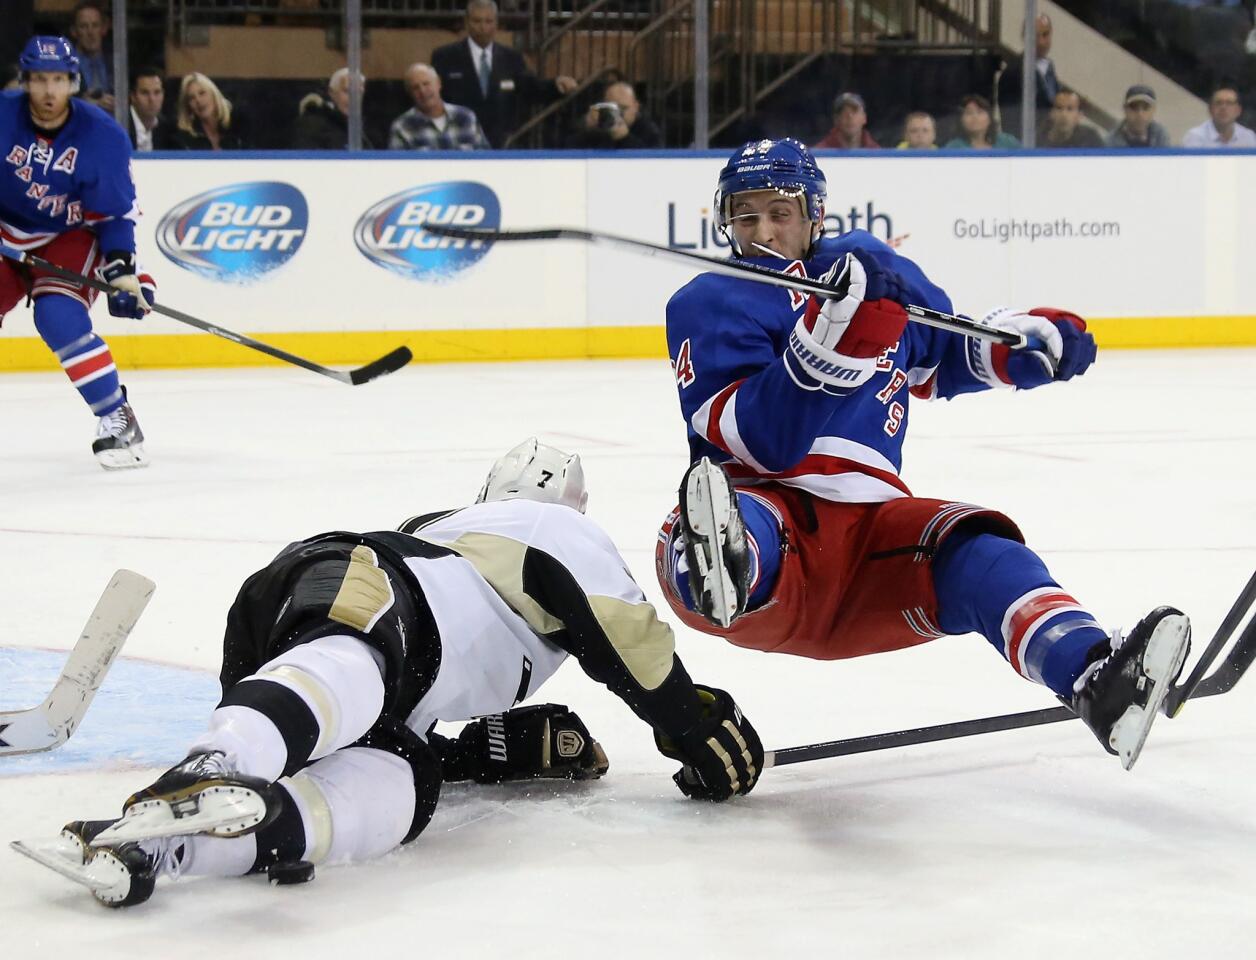 Paul Martin of the Pittsburgh Penguins trips up Ryan Callahan of the New York Rangers during the second period at Madison Square Garden on Nov. 6 in New York.